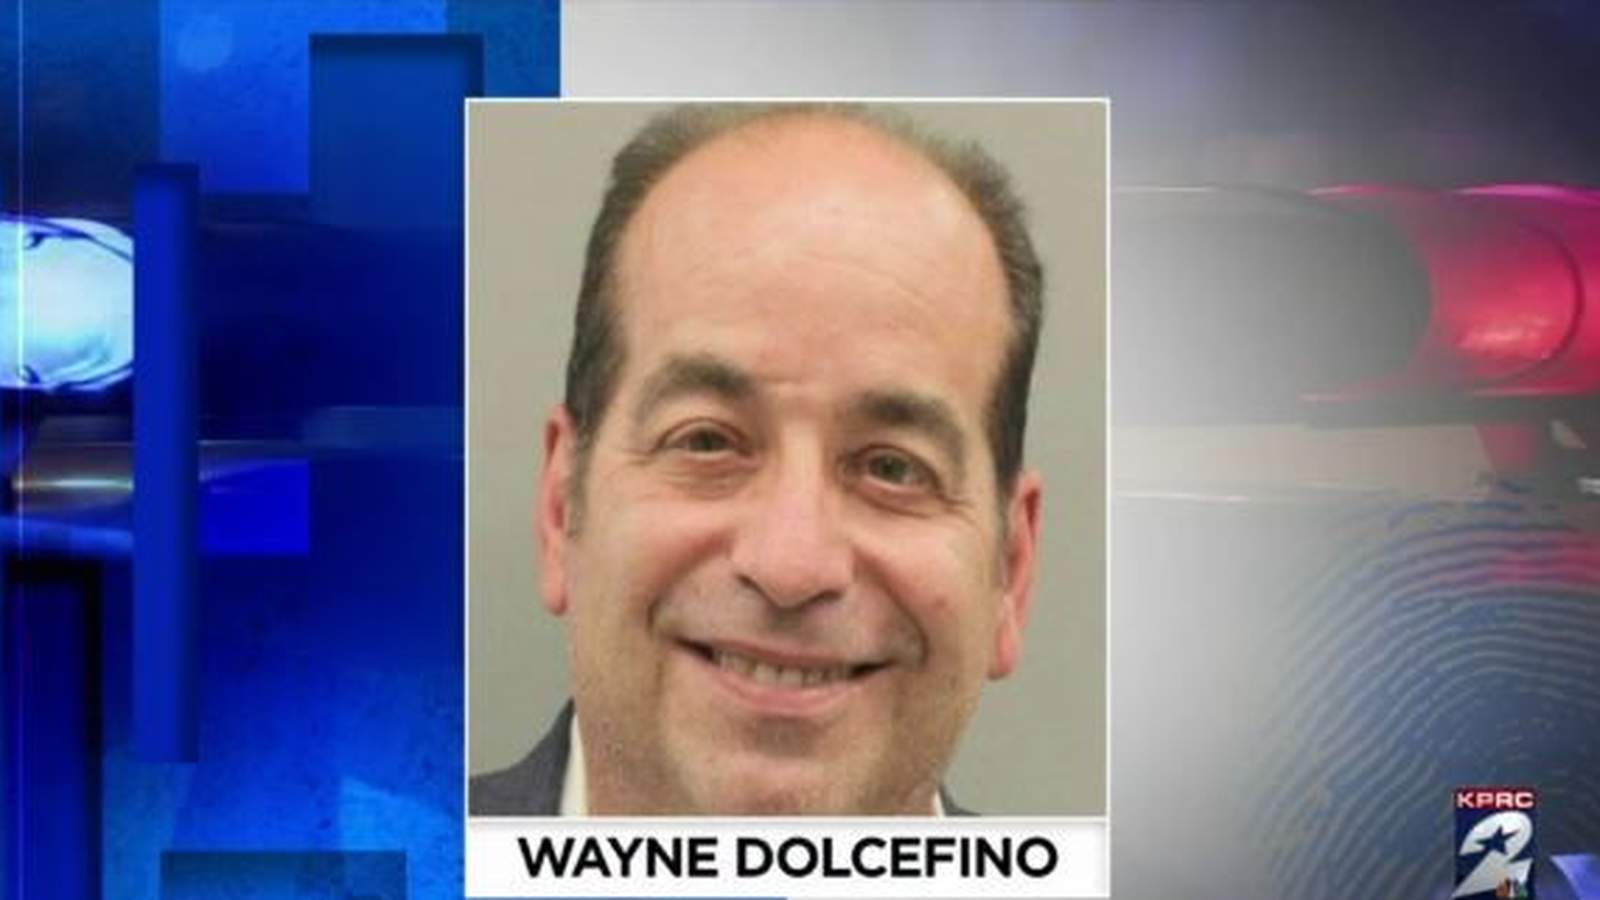 Former investigative reporter Wayne Dolcefino charged with contempt of court